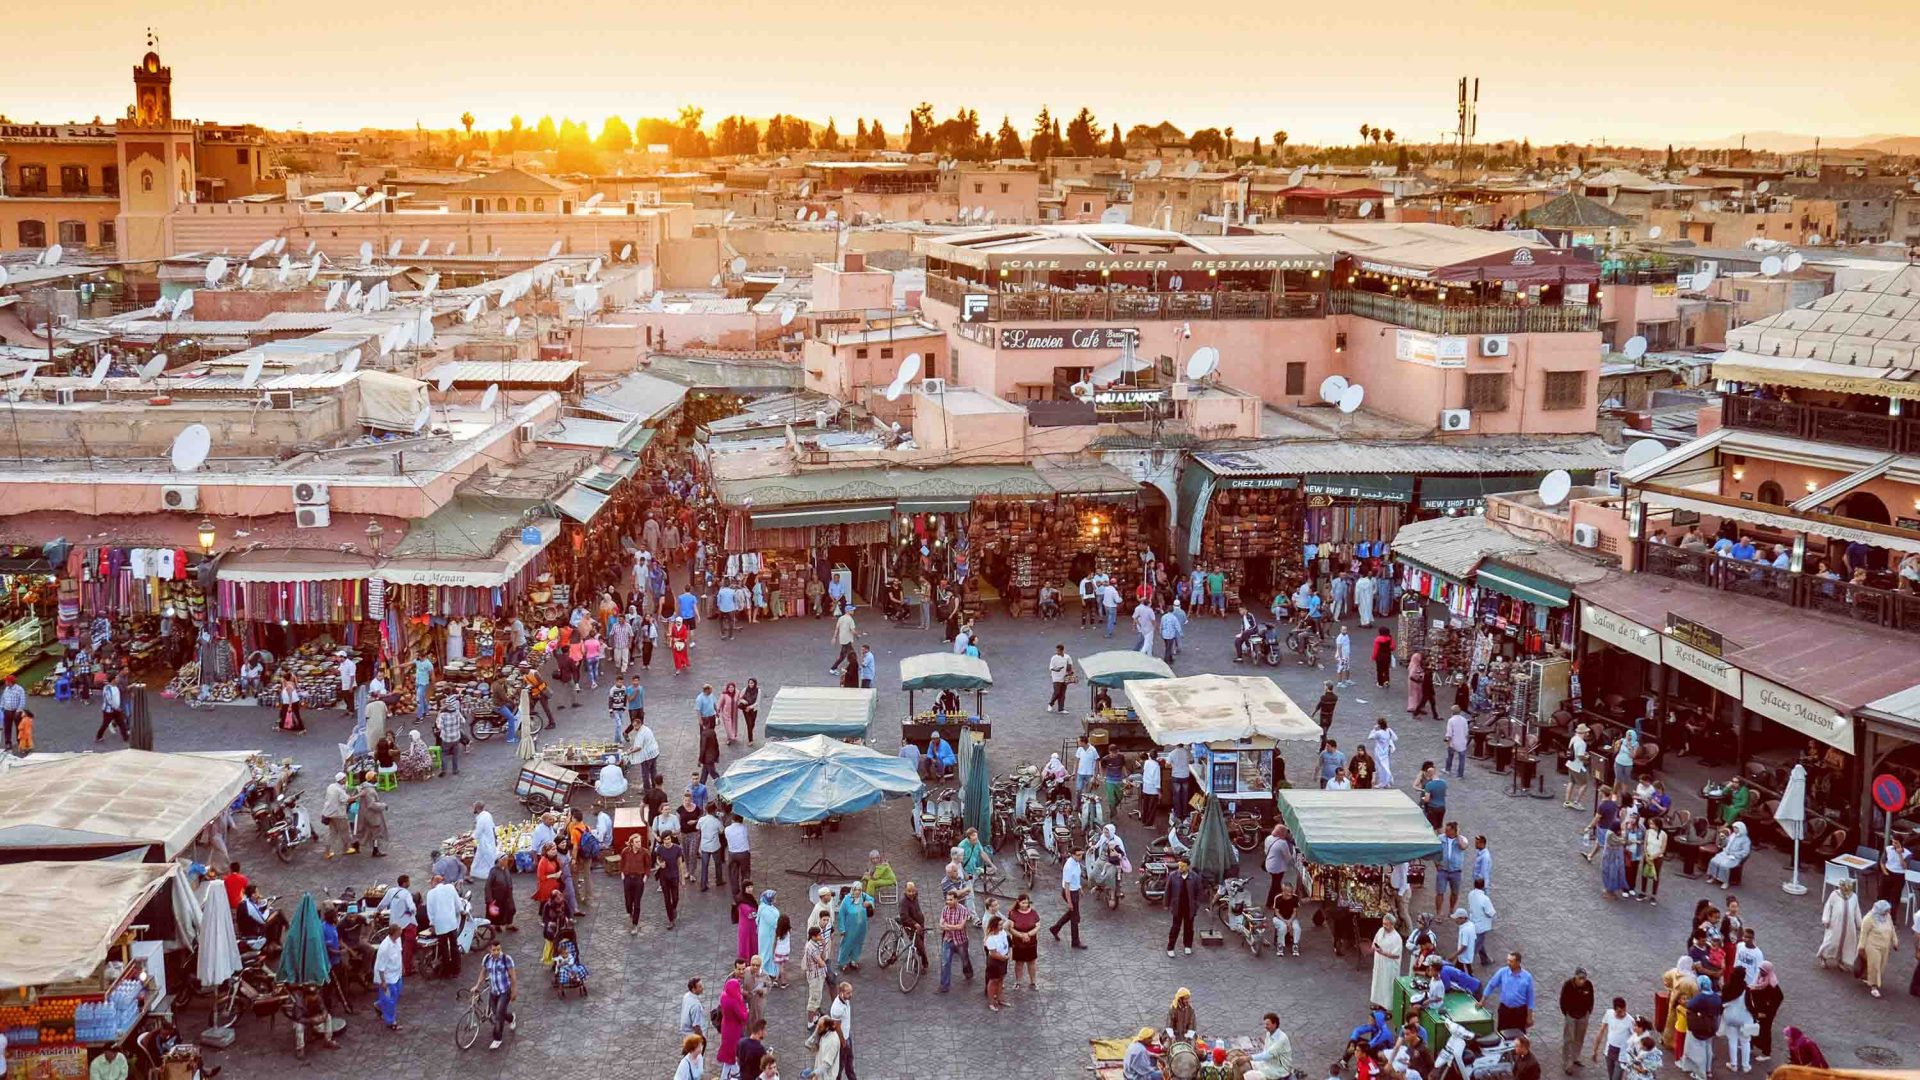 Jemma El Fna - a market in Marrakesh - seen at the end of the day with the sun setting over the stalls.